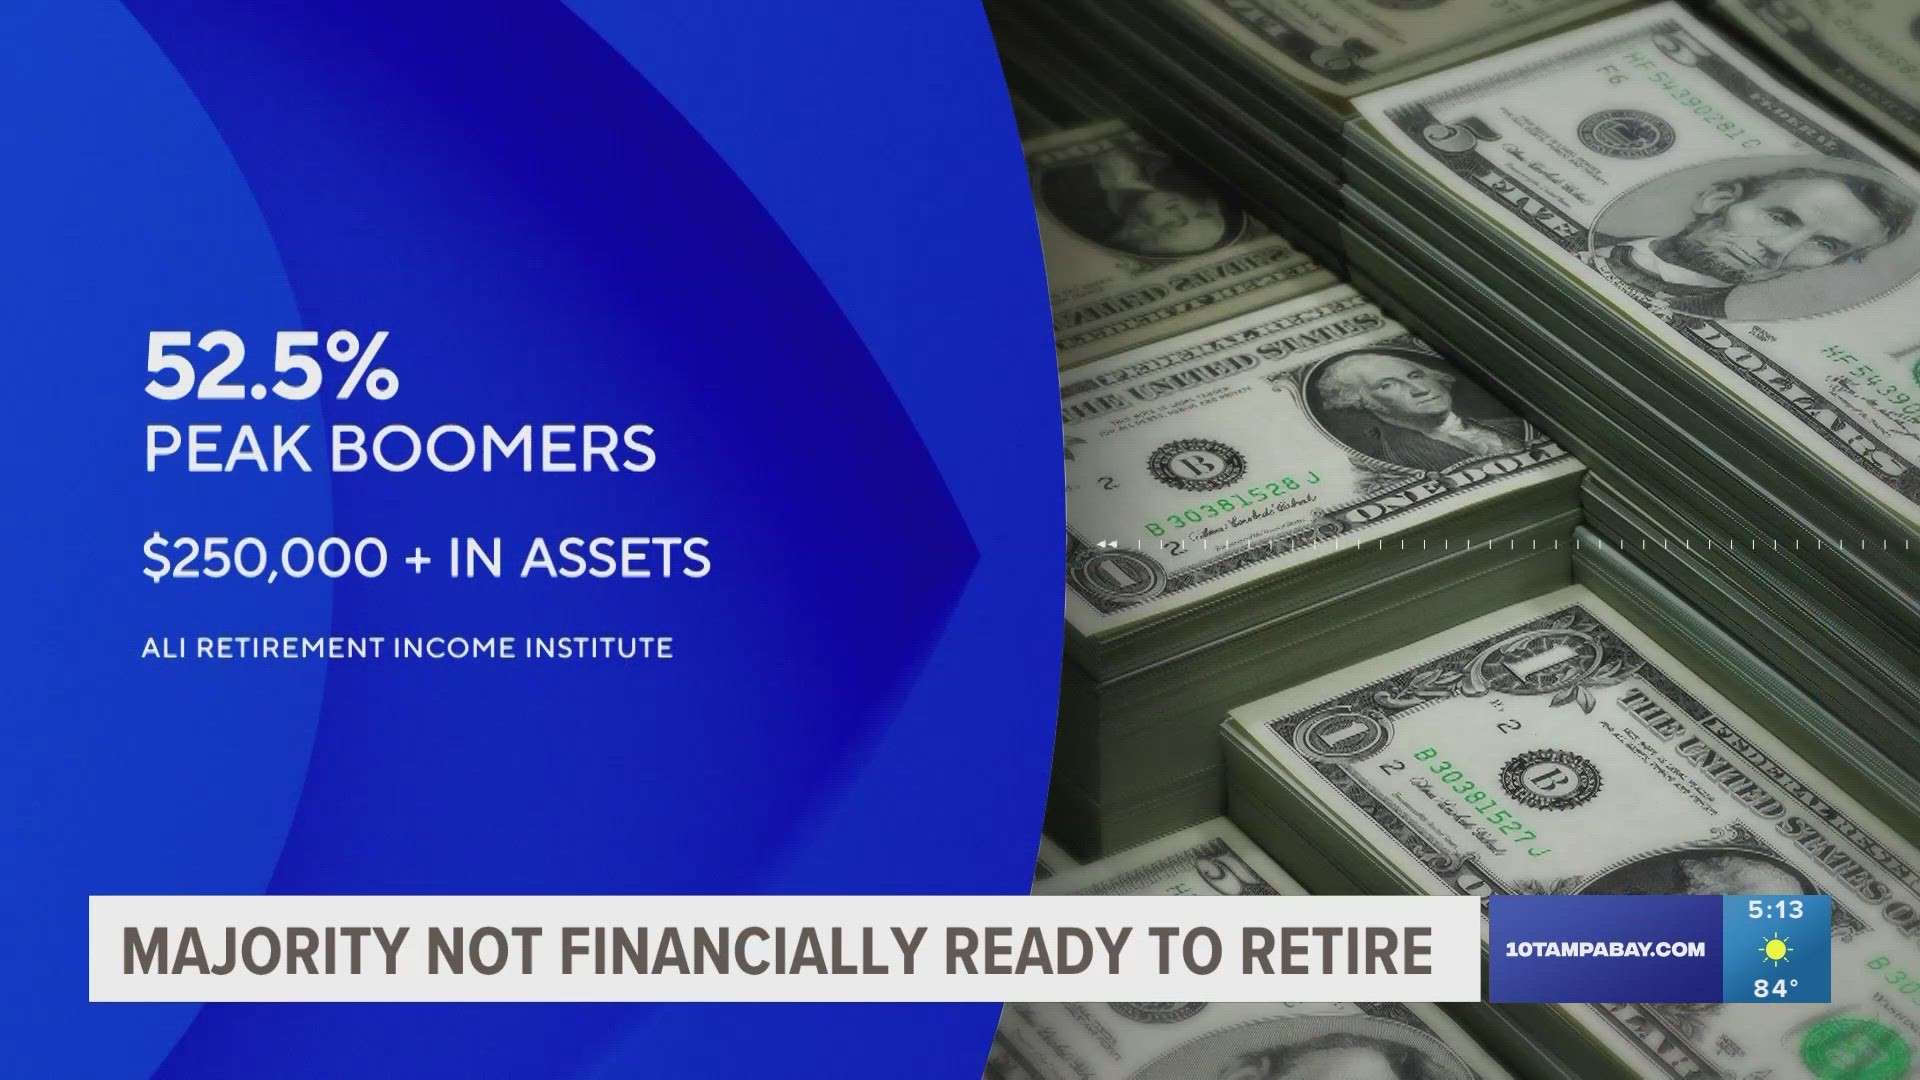 A new study shows about 52% of peak boomers have assets of about $250,000 or less.